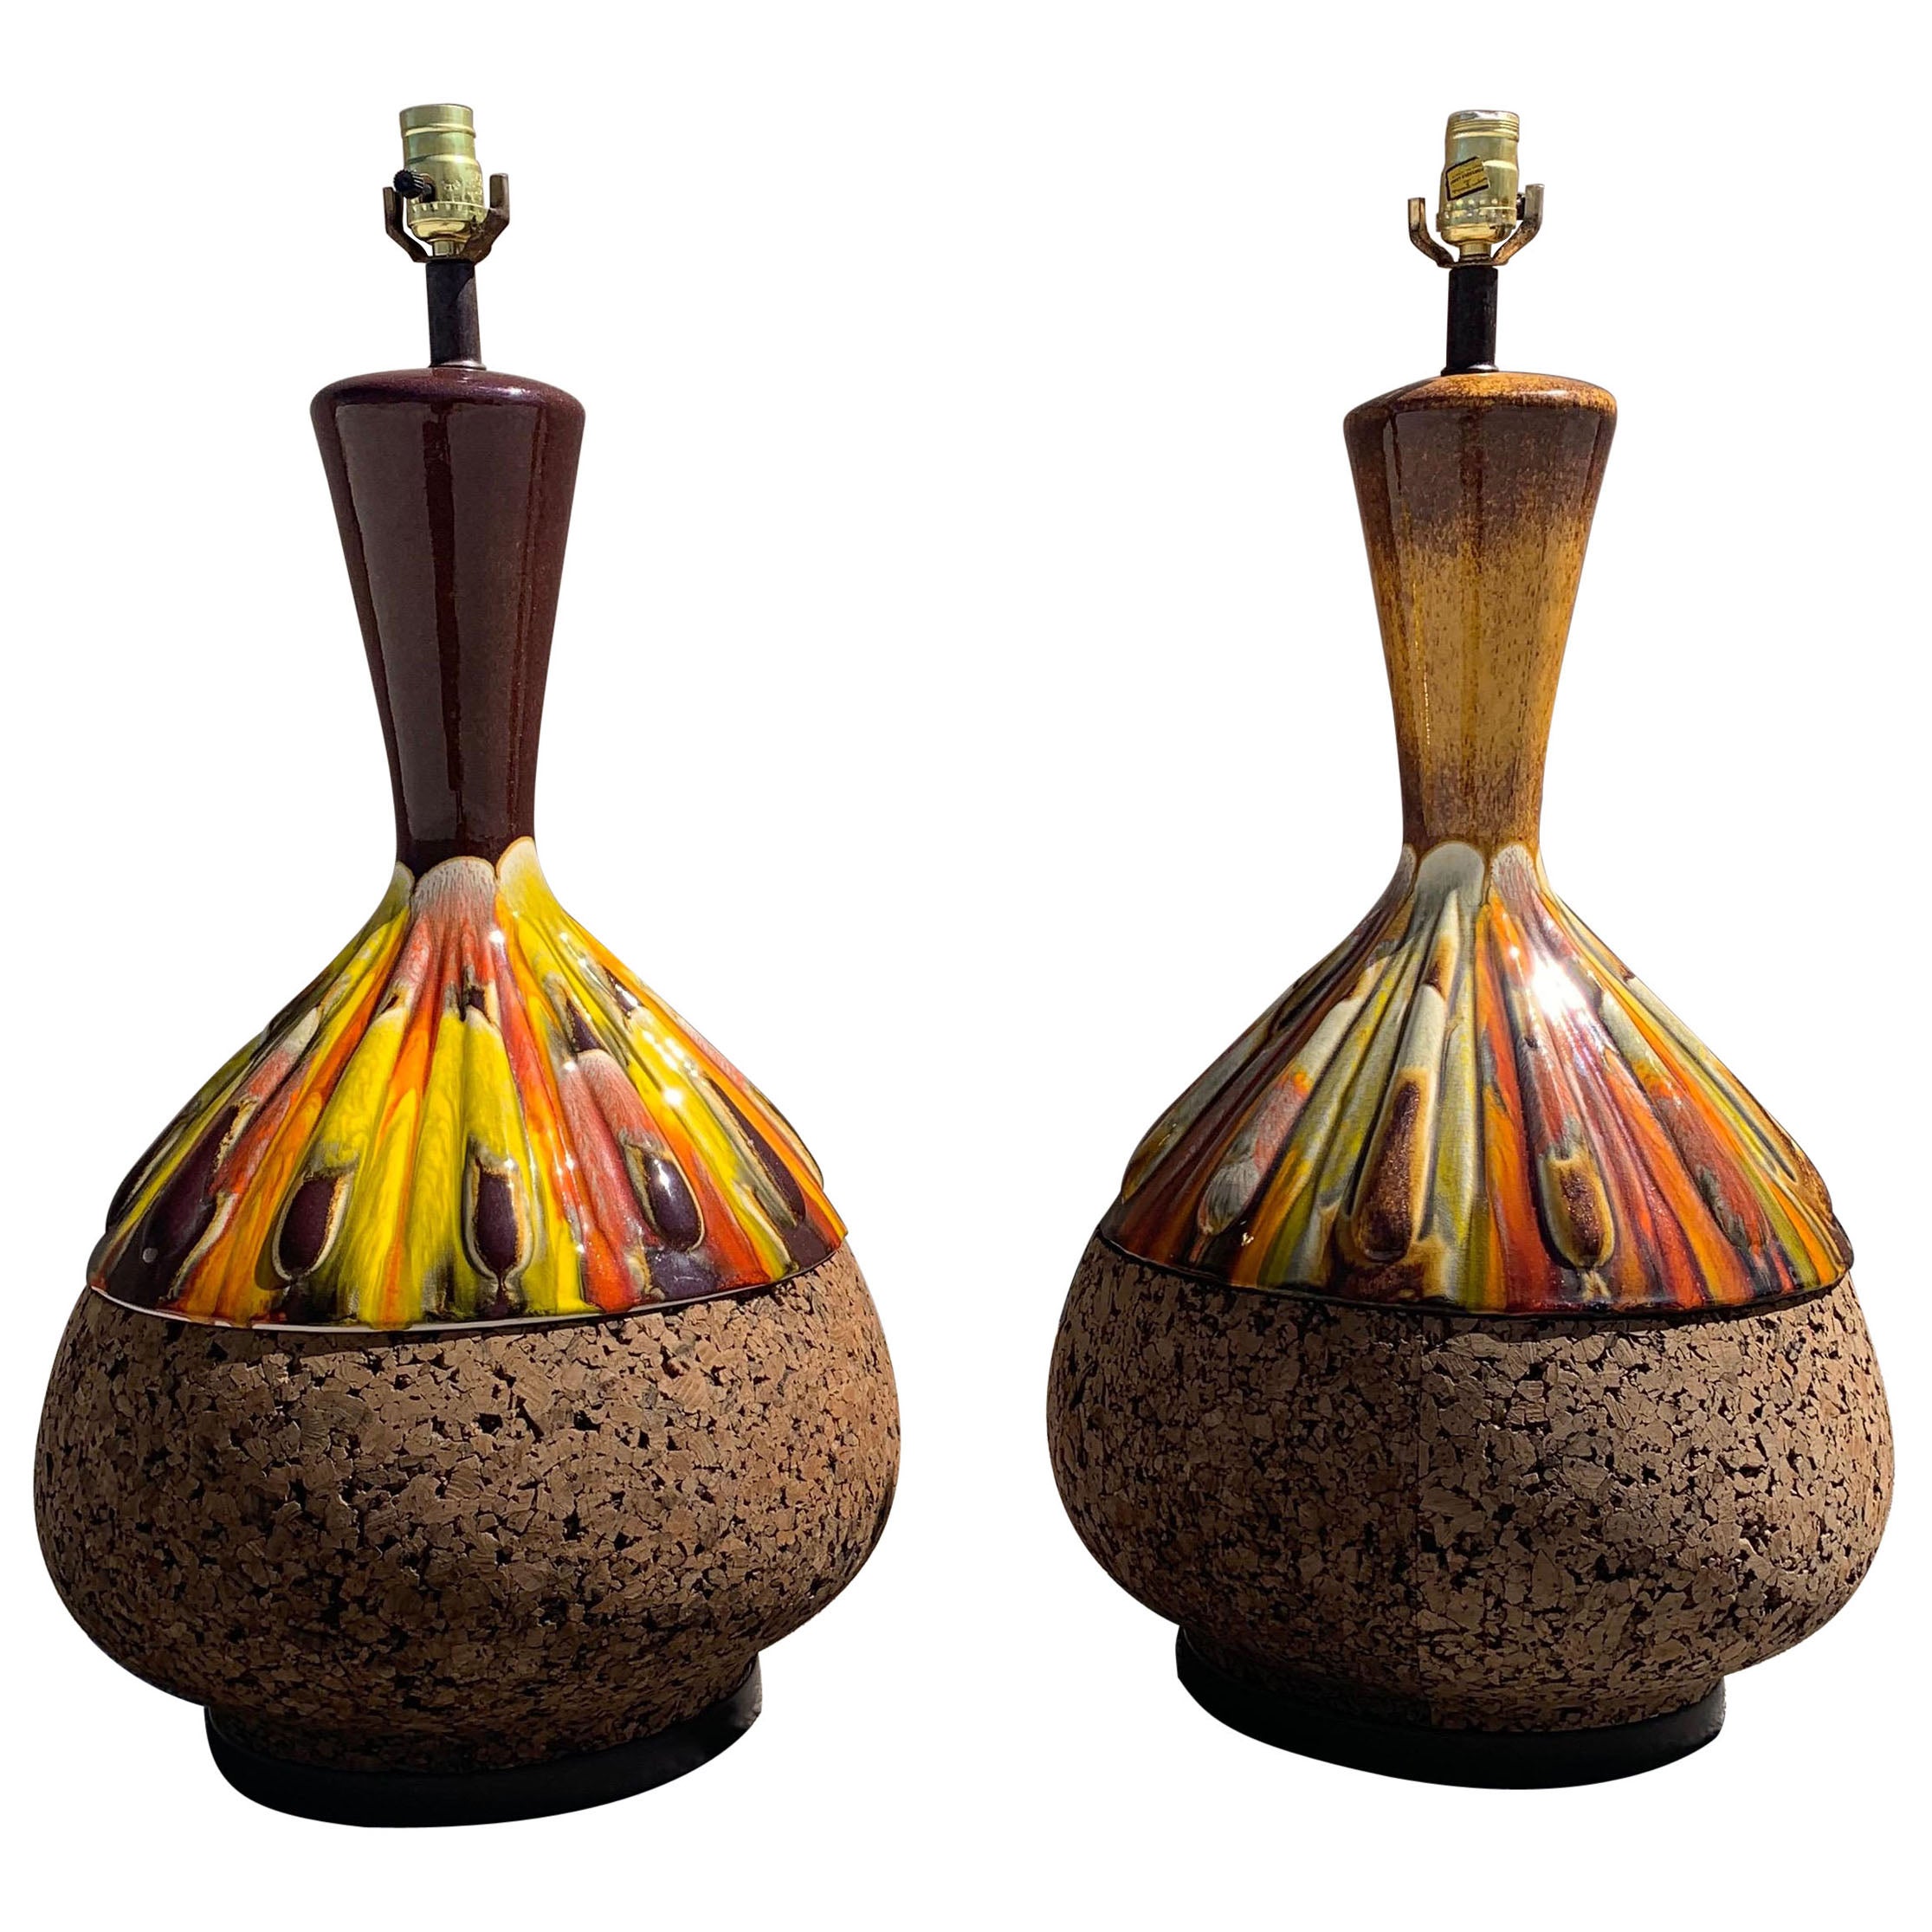 1960s Mid-Century Modern Cork and Ceramic Lamps, a Pair